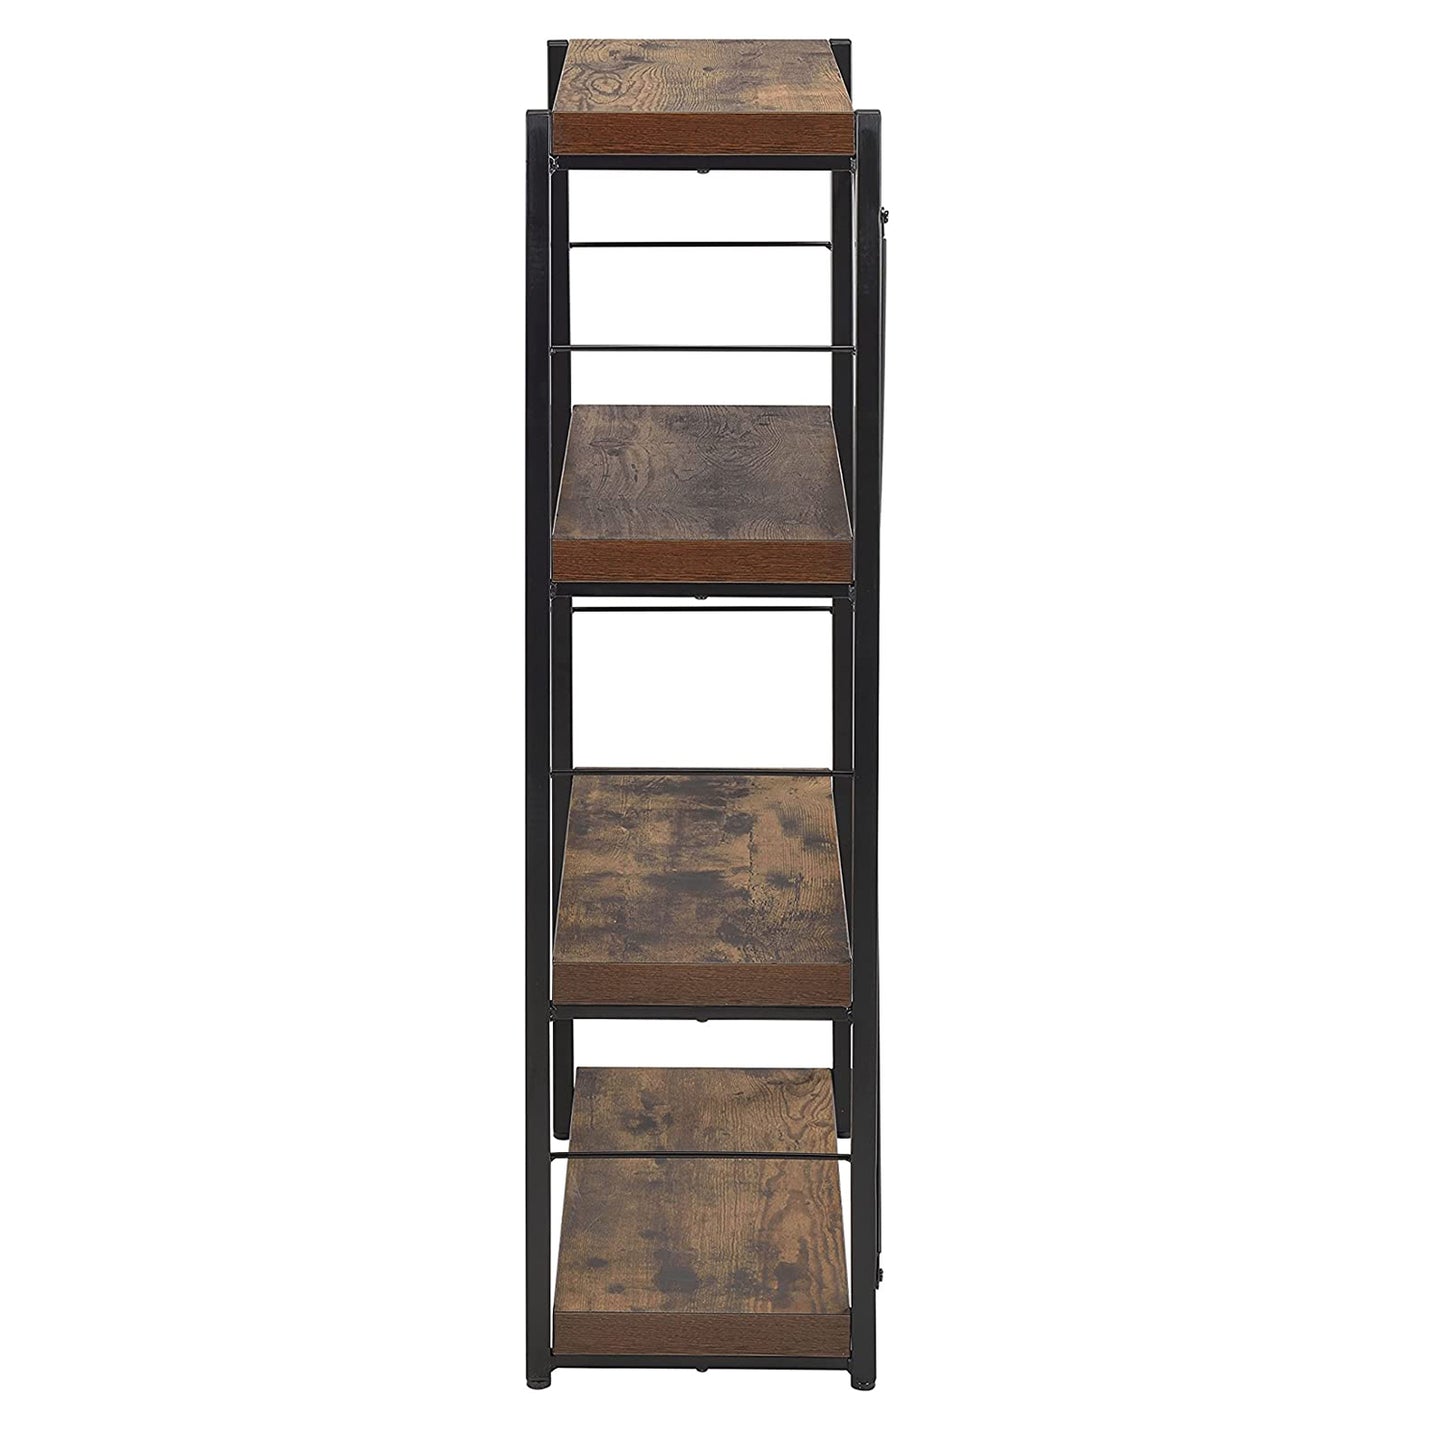 43" Brown And Black Metal Three Tier Etagere Bookcase